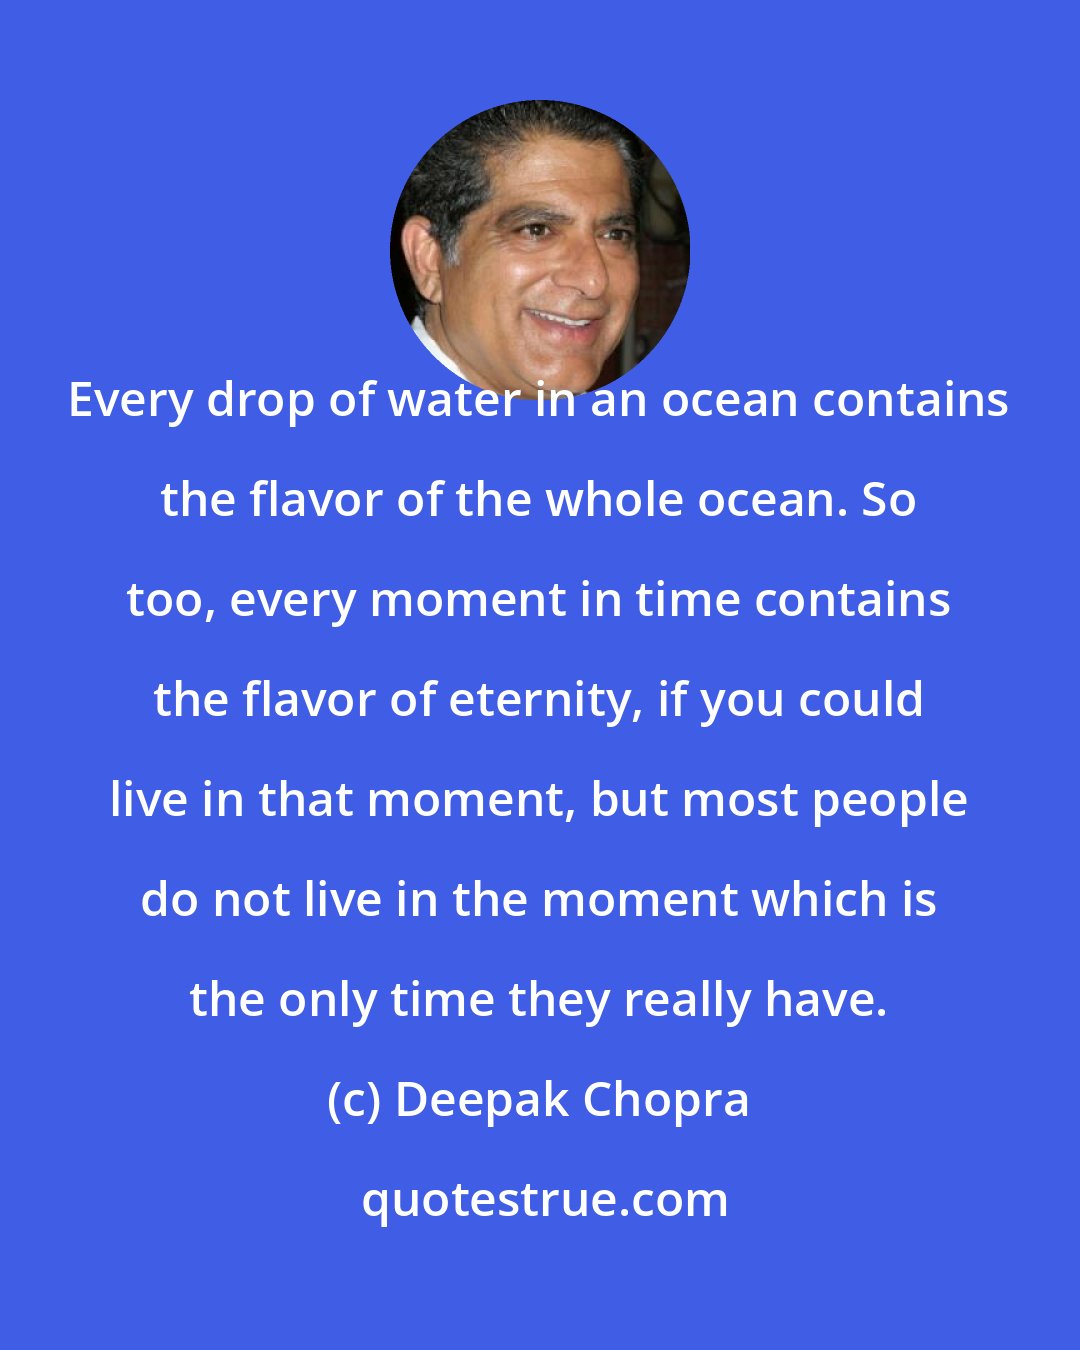 Deepak Chopra: Every drop of water in an ocean contains the flavor of the whole ocean. So too, every moment in time contains the flavor of eternity, if you could live in that moment, but most people do not live in the moment which is the only time they really have.